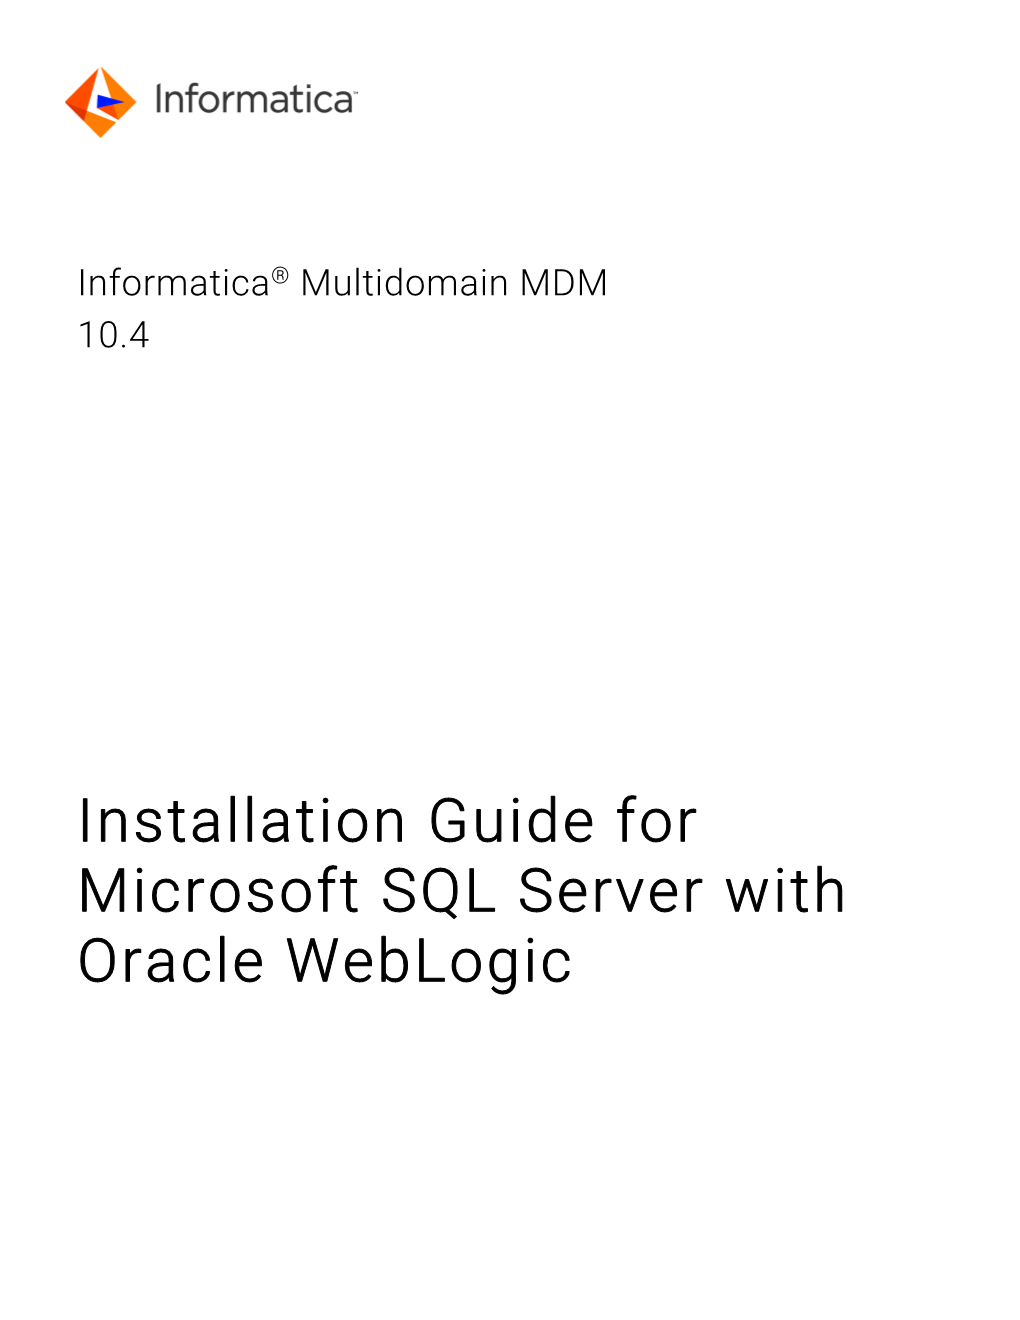 Installation Guide for Microsoft SQL Server With